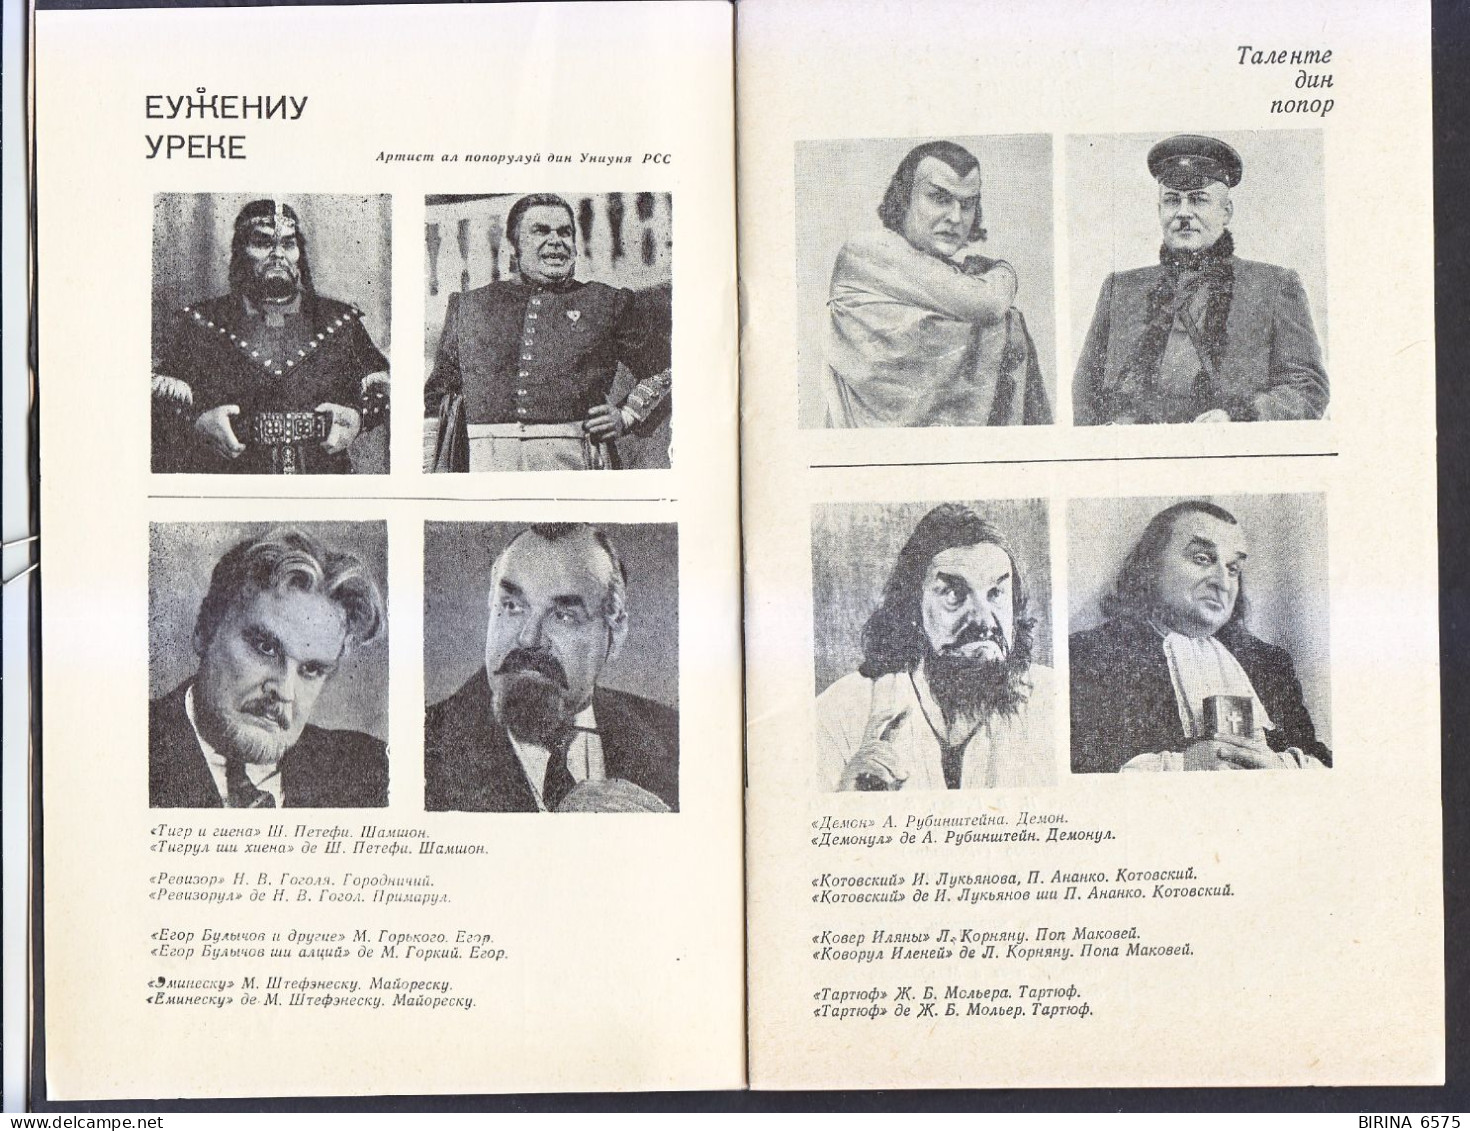 BROCHURE. PEOPLE'S ARTIST OF THE USSR. E. UREKE. CHISINAU. IN RUSSIAN AND MOLDOVAN. - 7-30-i - Théâtre